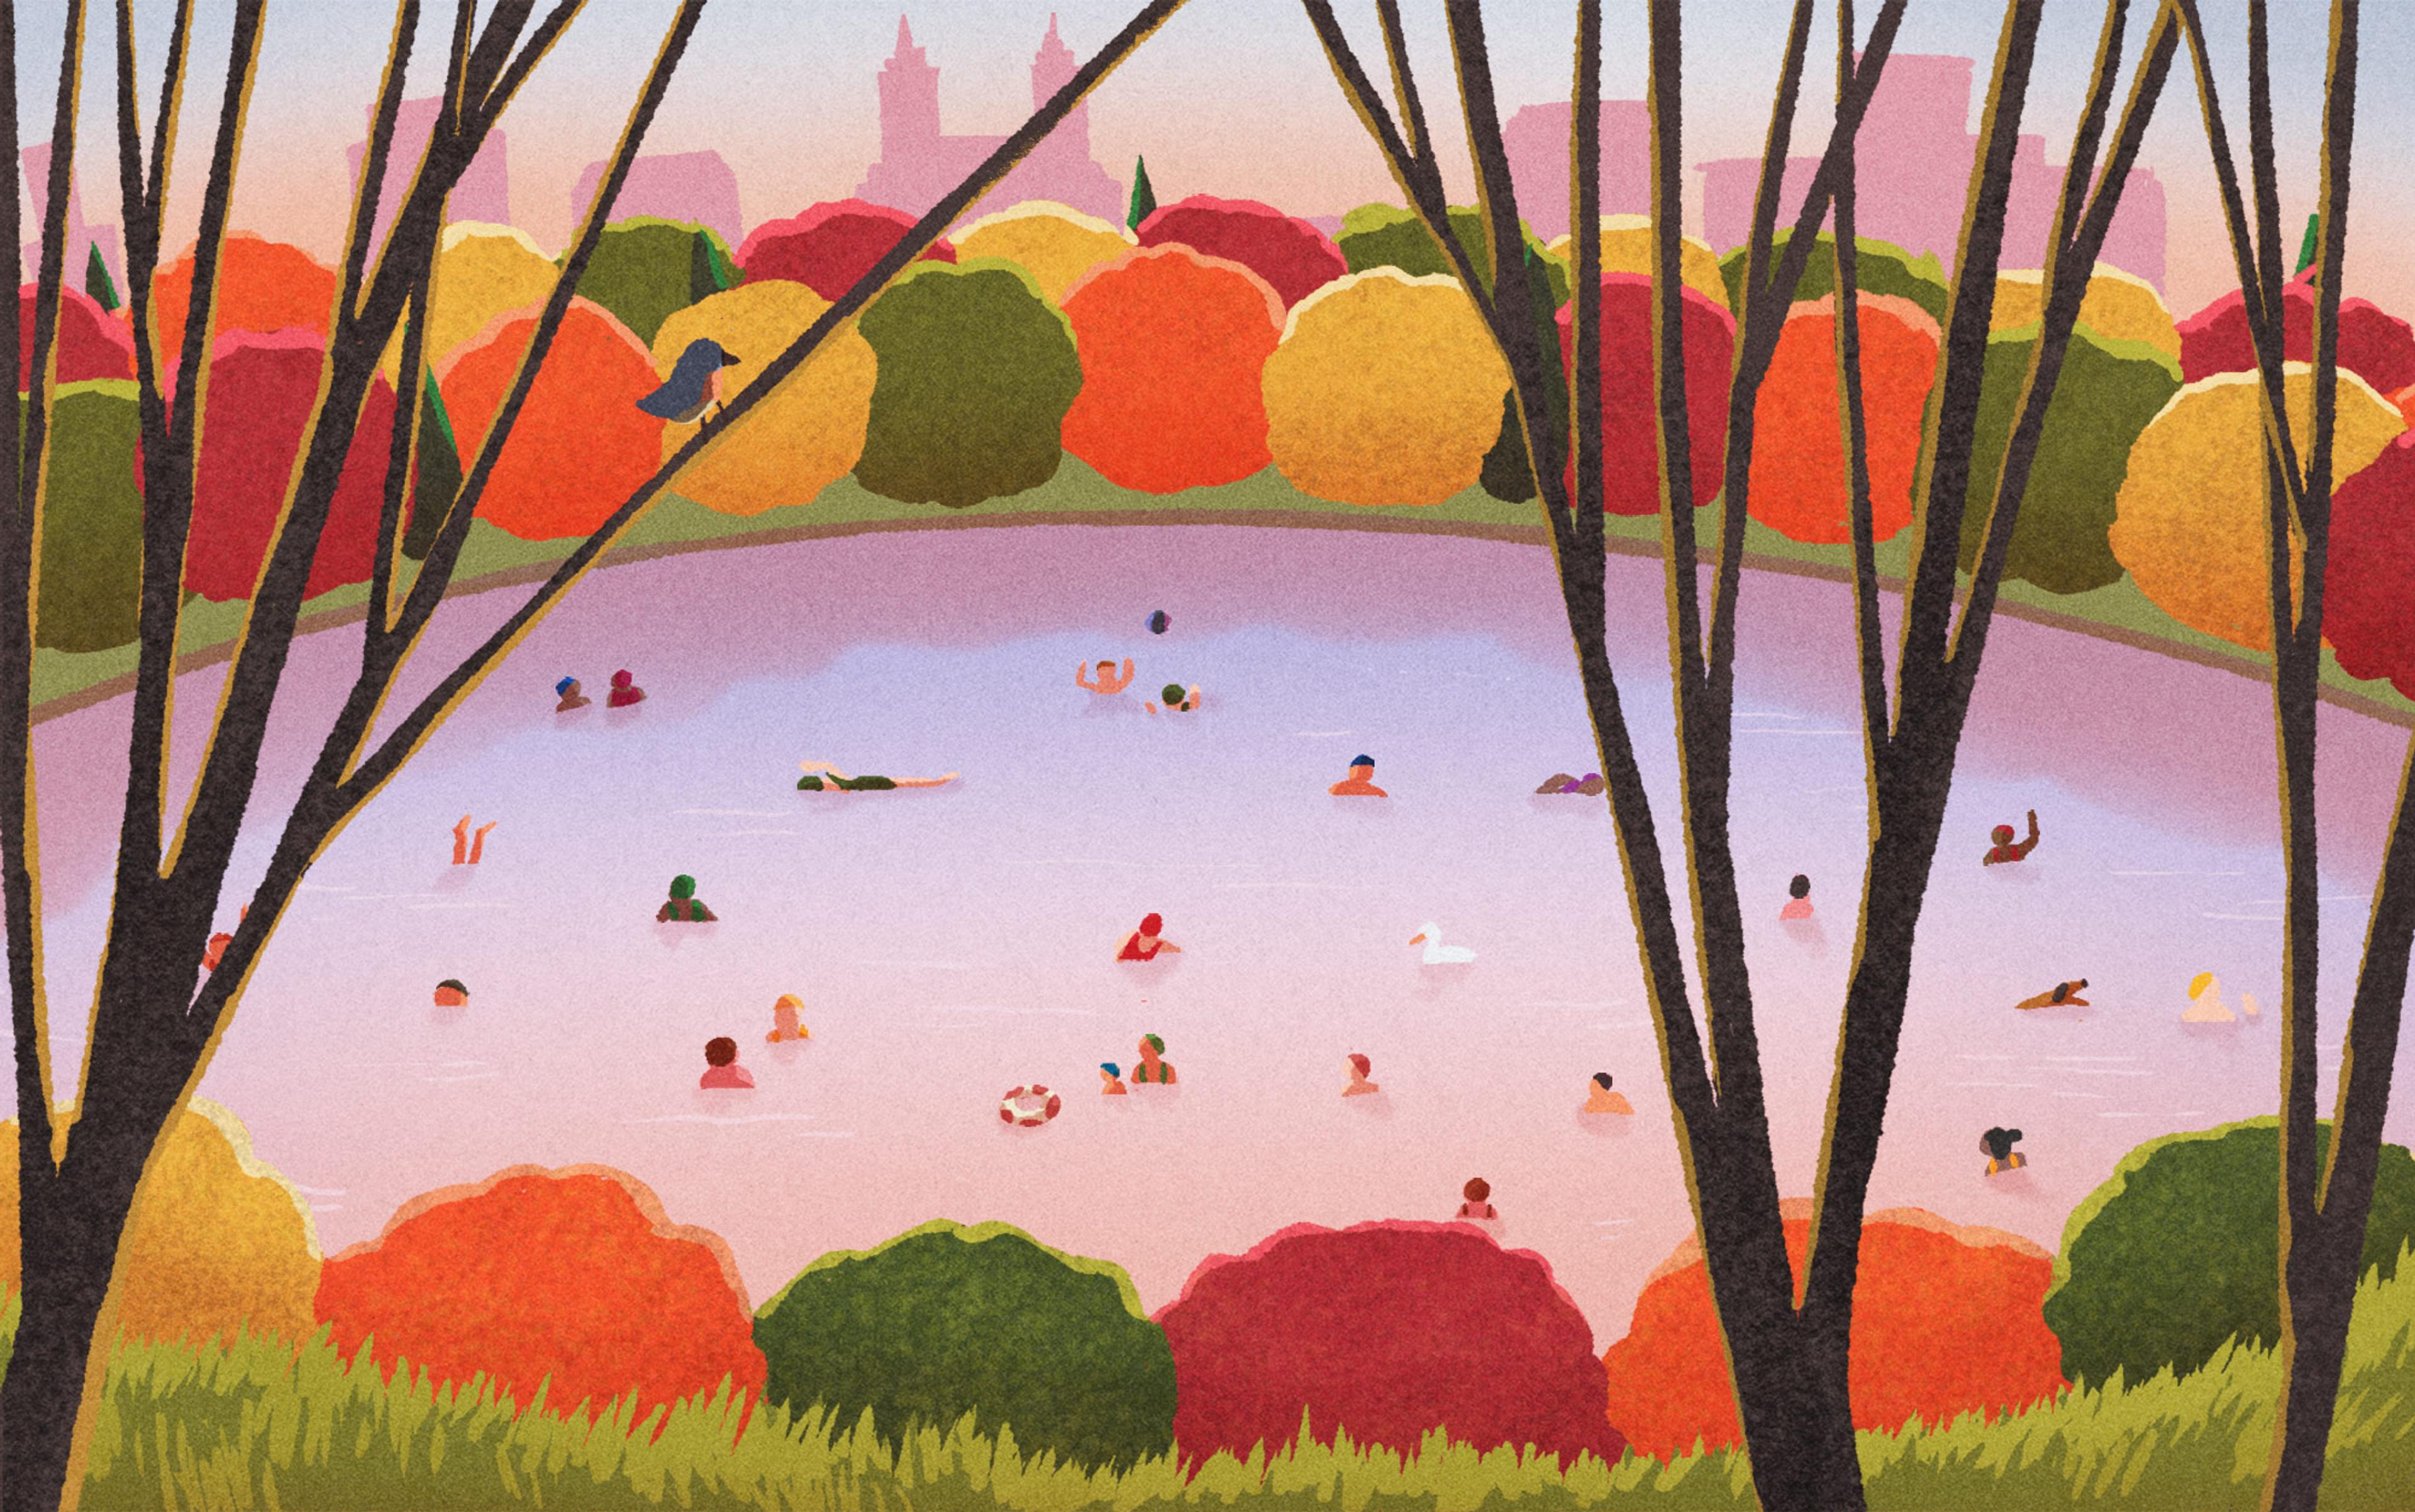 A colour illustration of a pool of water in which many people are swimming, glimpsed through trees, against a city skyline background